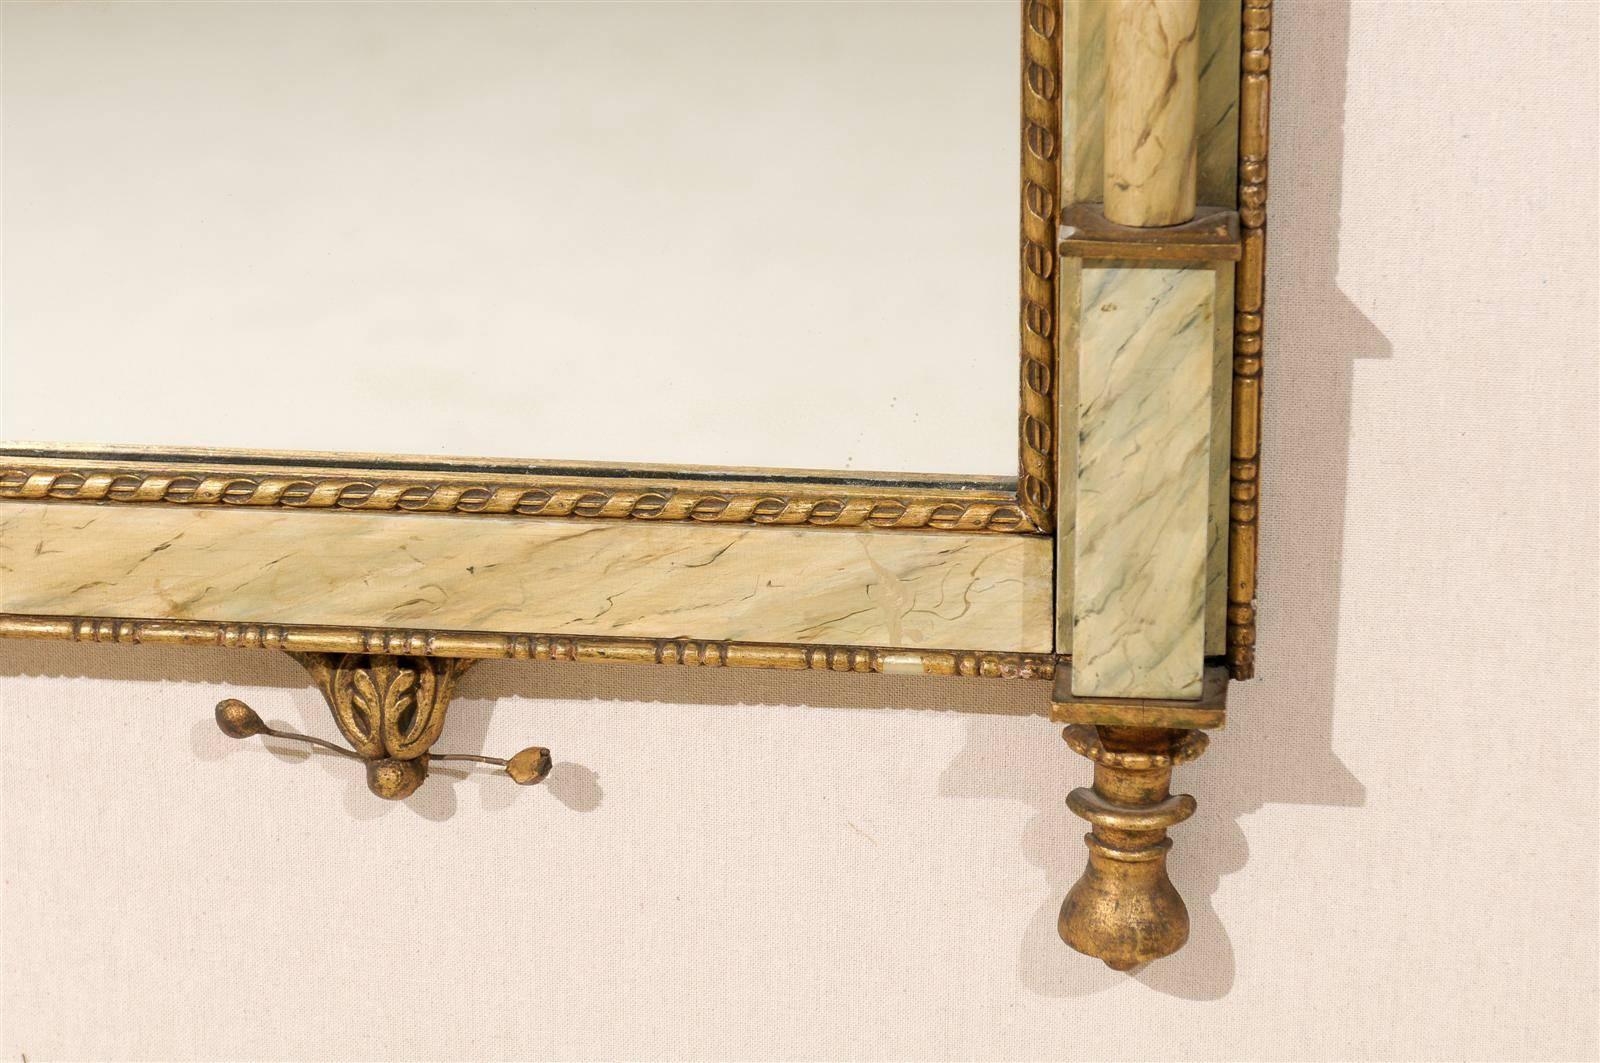 20th Century Italian Wall Mirror with Faux Marble Frame and Decorative Floral Additions